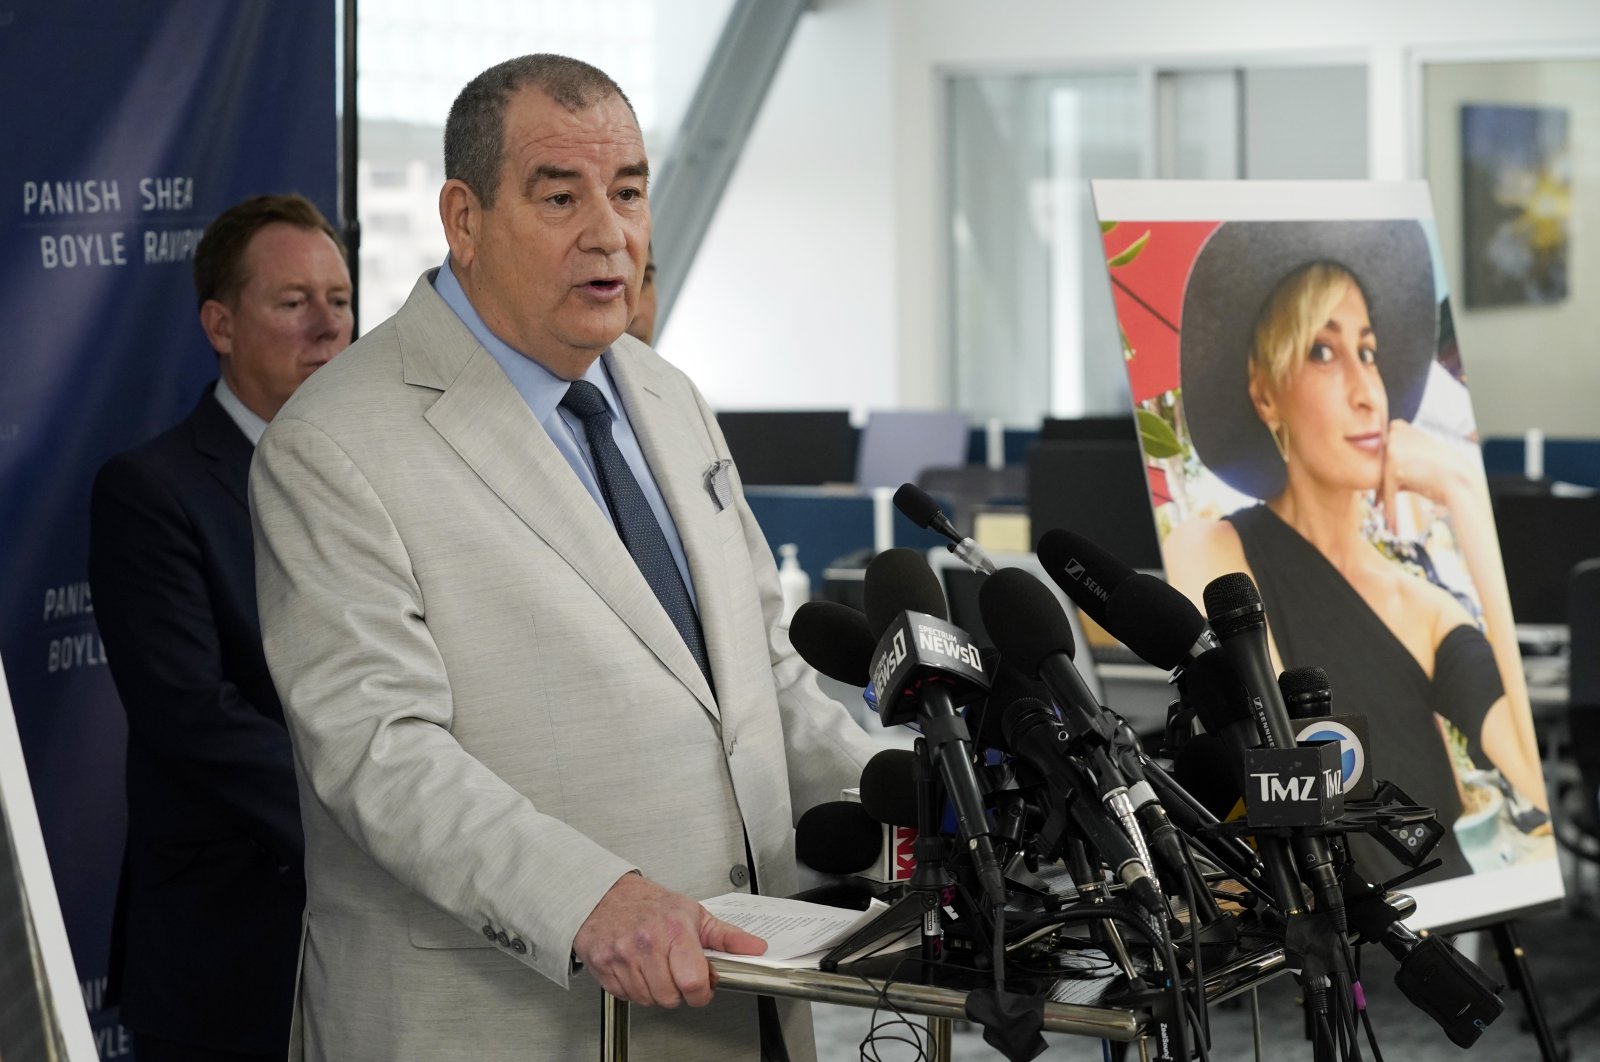 Brian Panish, an attorney for the family of late cinematographer Halyna Hutchins, speaks to reporters alongside a portrait of Hutchins during a news conference, Los Angeles, U.S., Feb. 15, 2022. (AP)